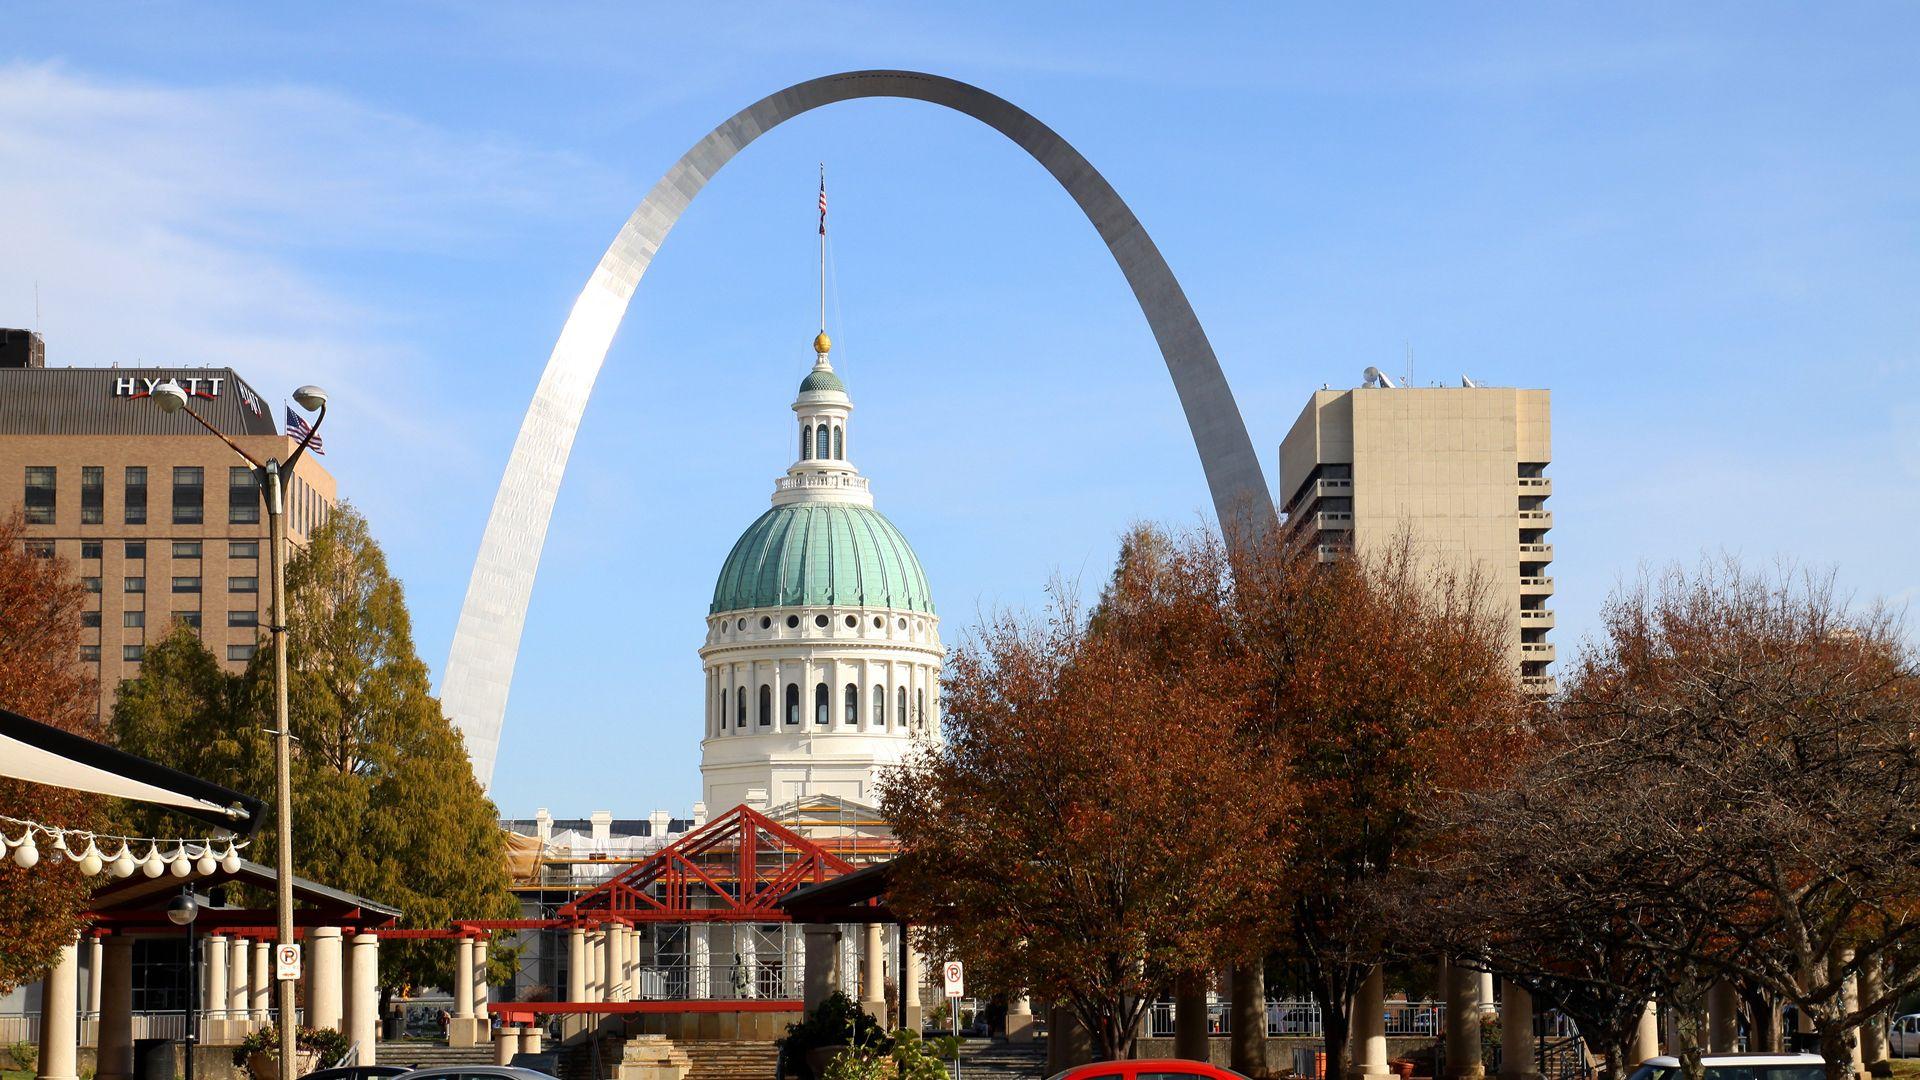 Gateway Arch completed 1965